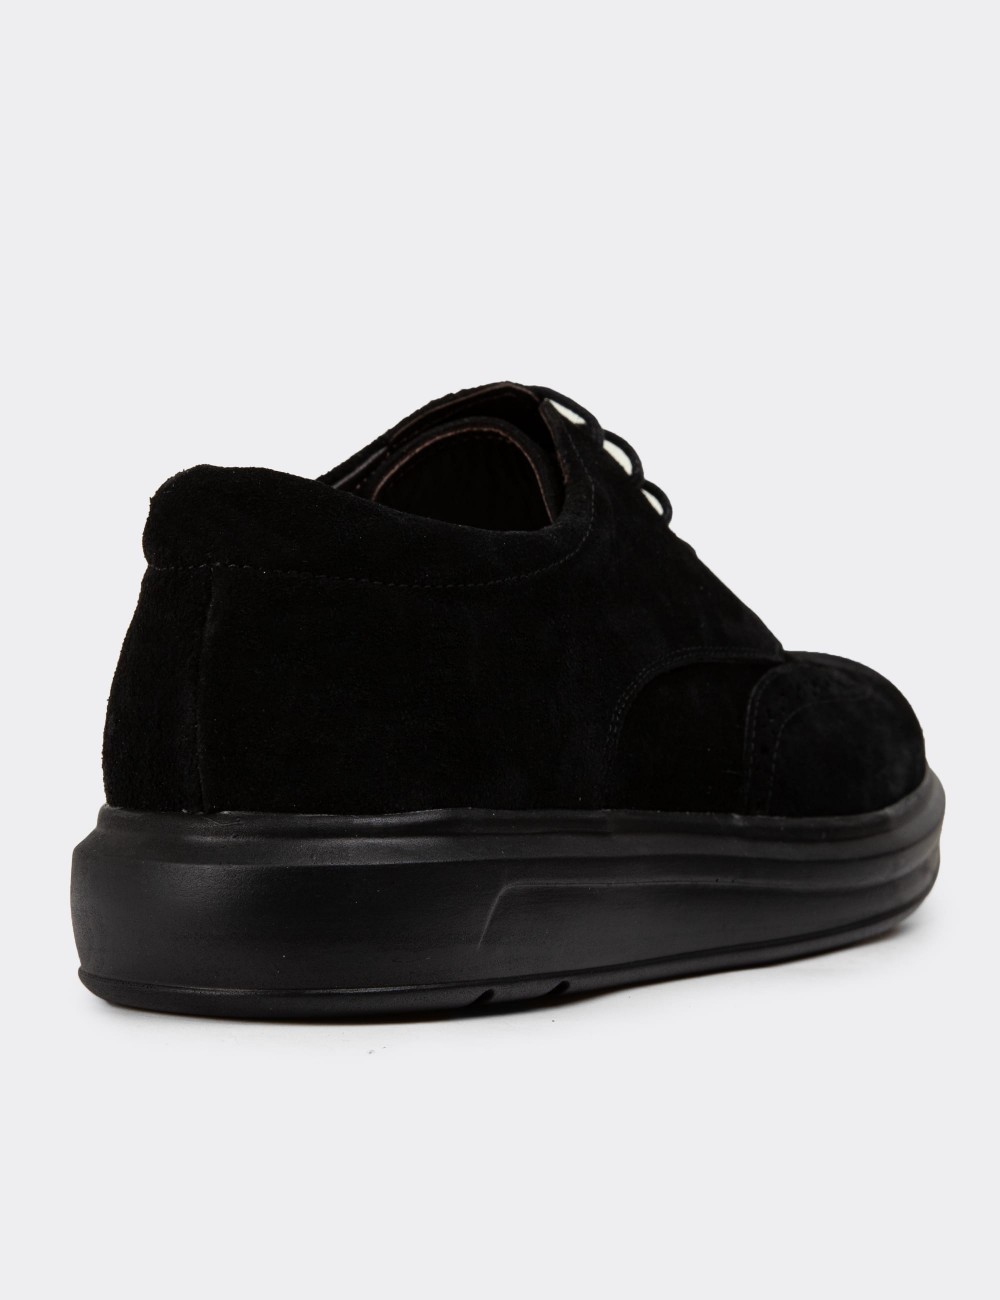 Black Suede Leather Lace-up Shoes - 01942MSYHP03